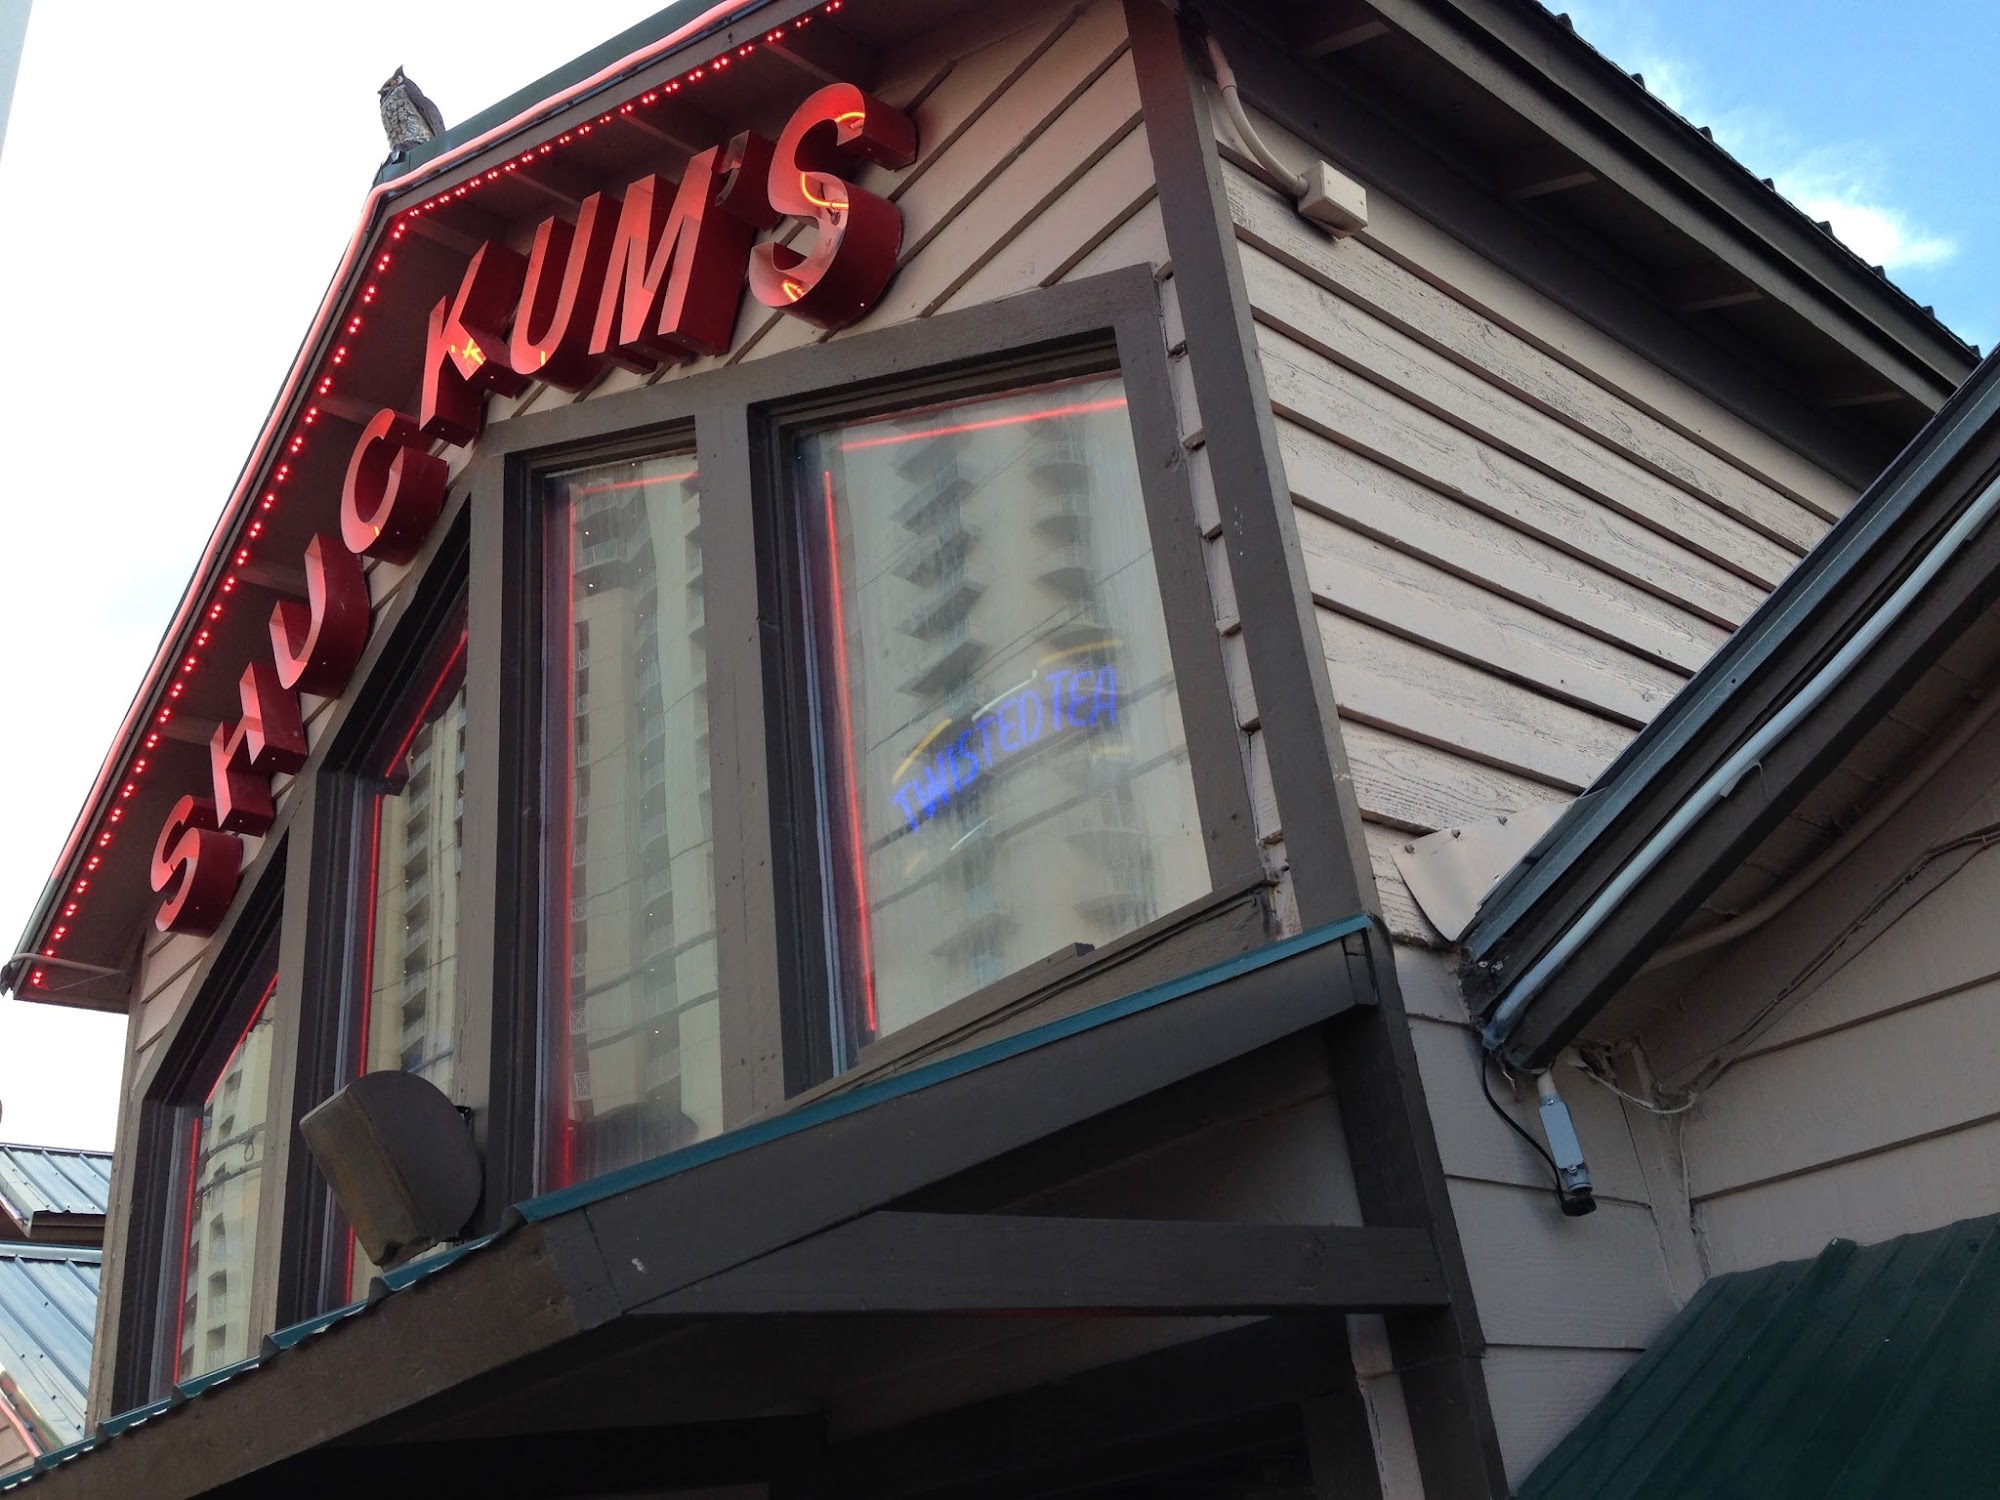 Shuckums Oyster Pub & Seafood Grill